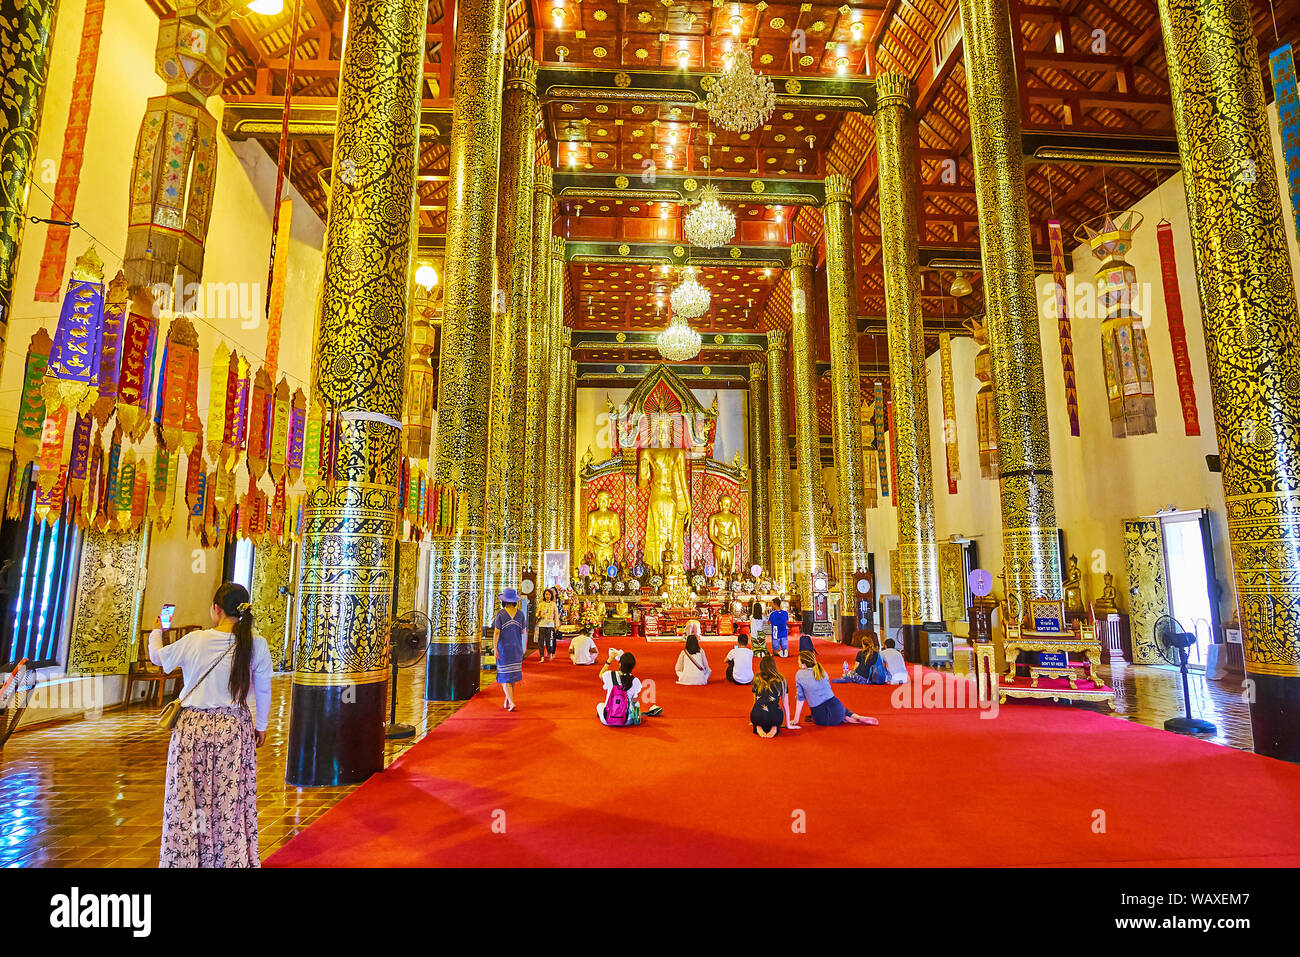 CHIANG MAI, THAILAND - MAY 2, 2019: Phra Viharn Luang prayer hall with  tall wooden columns, covered with fine patterns, vintage glass chandeliers and Stock Photo